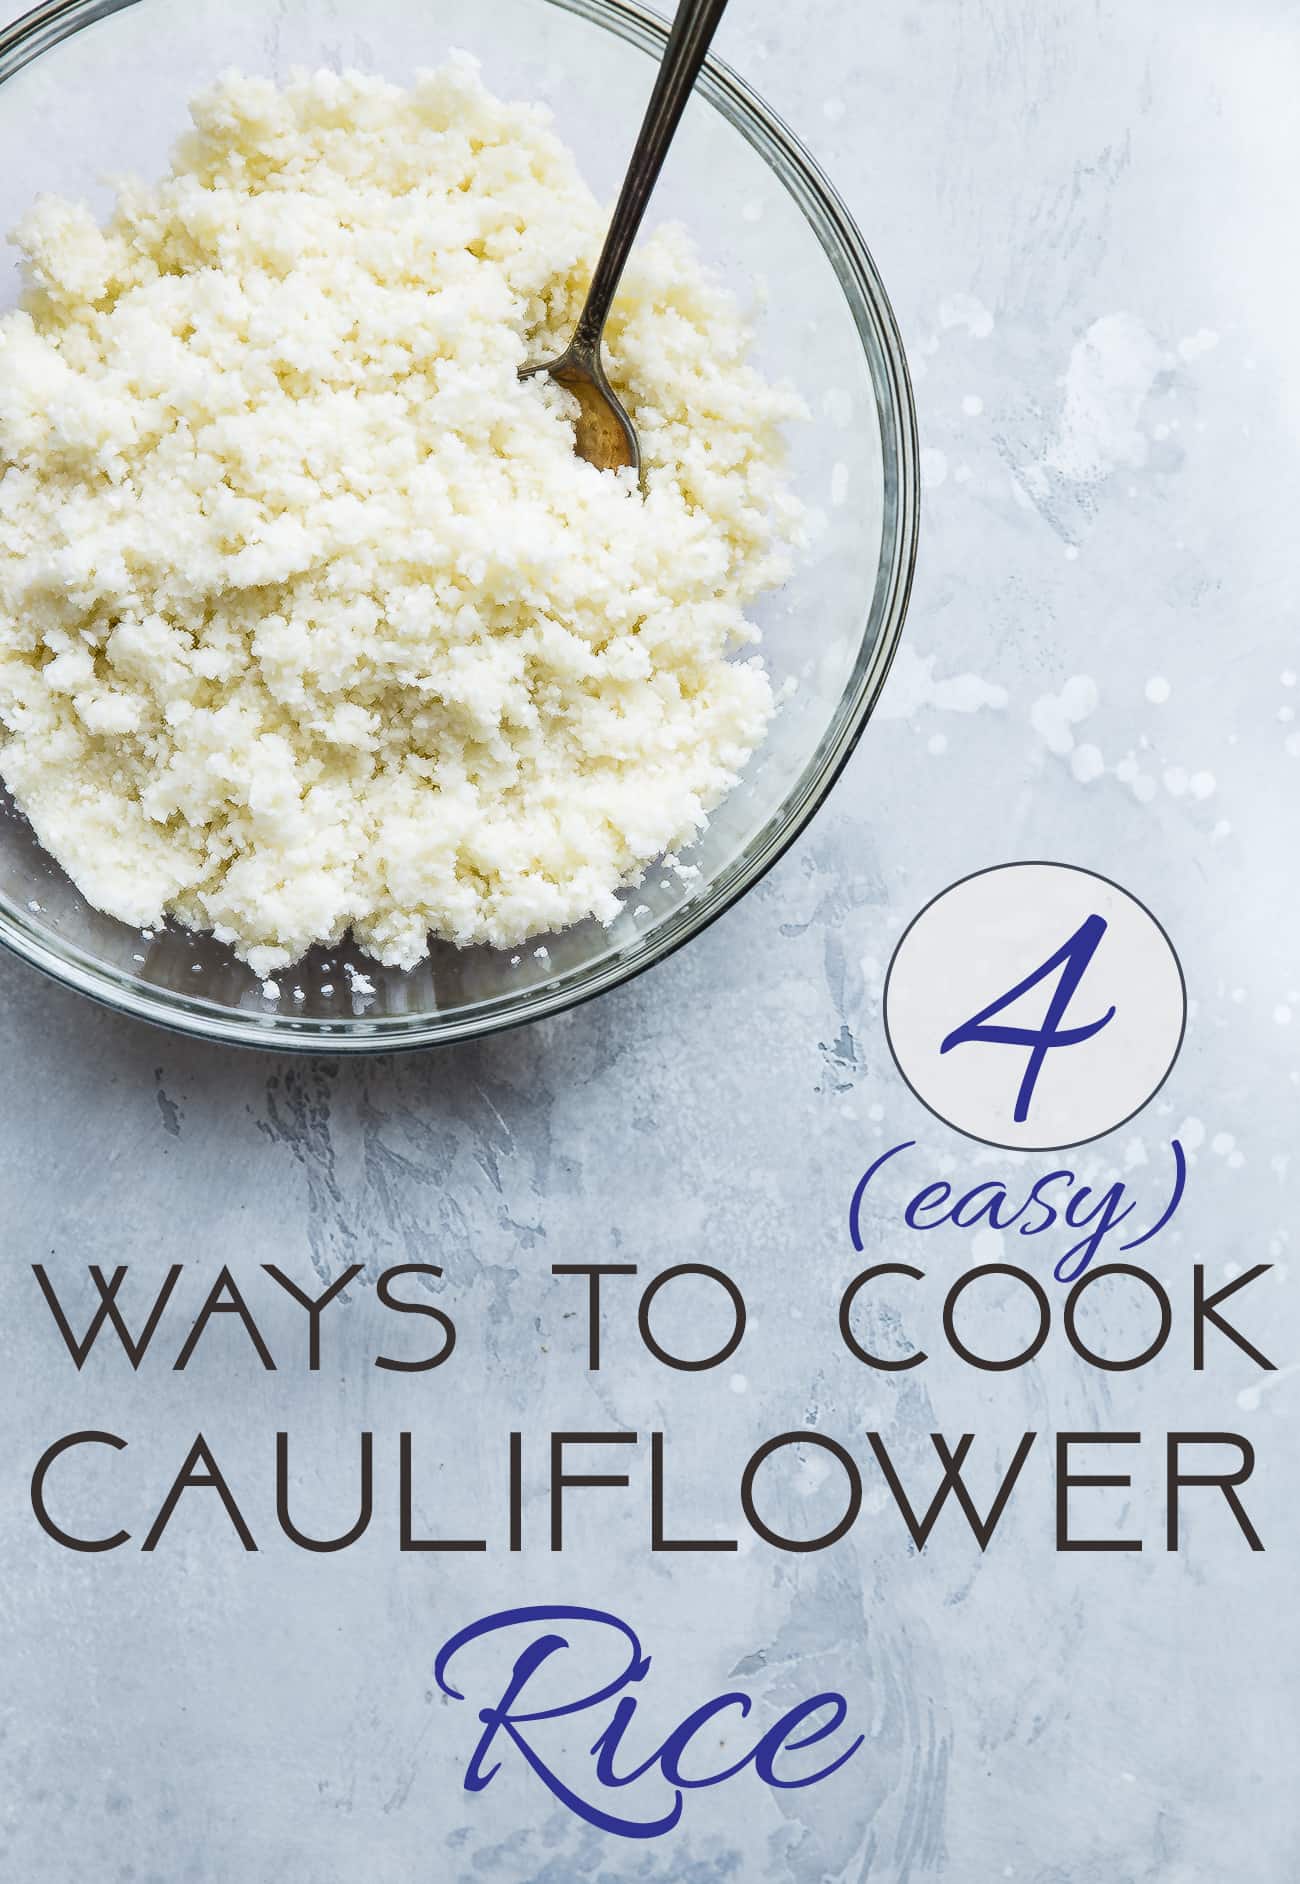 4 Easy Ways to Cook Cauliflower Rice - Ever wondered how to cook cauliflower rice without a microwave? Here are 4 simple and healthy ways that make cooking cauliflower rice easy and delicious! | #Foodfaithfitness | #Glutenfree #Keto #Lowcarb #healthy #cauliflower